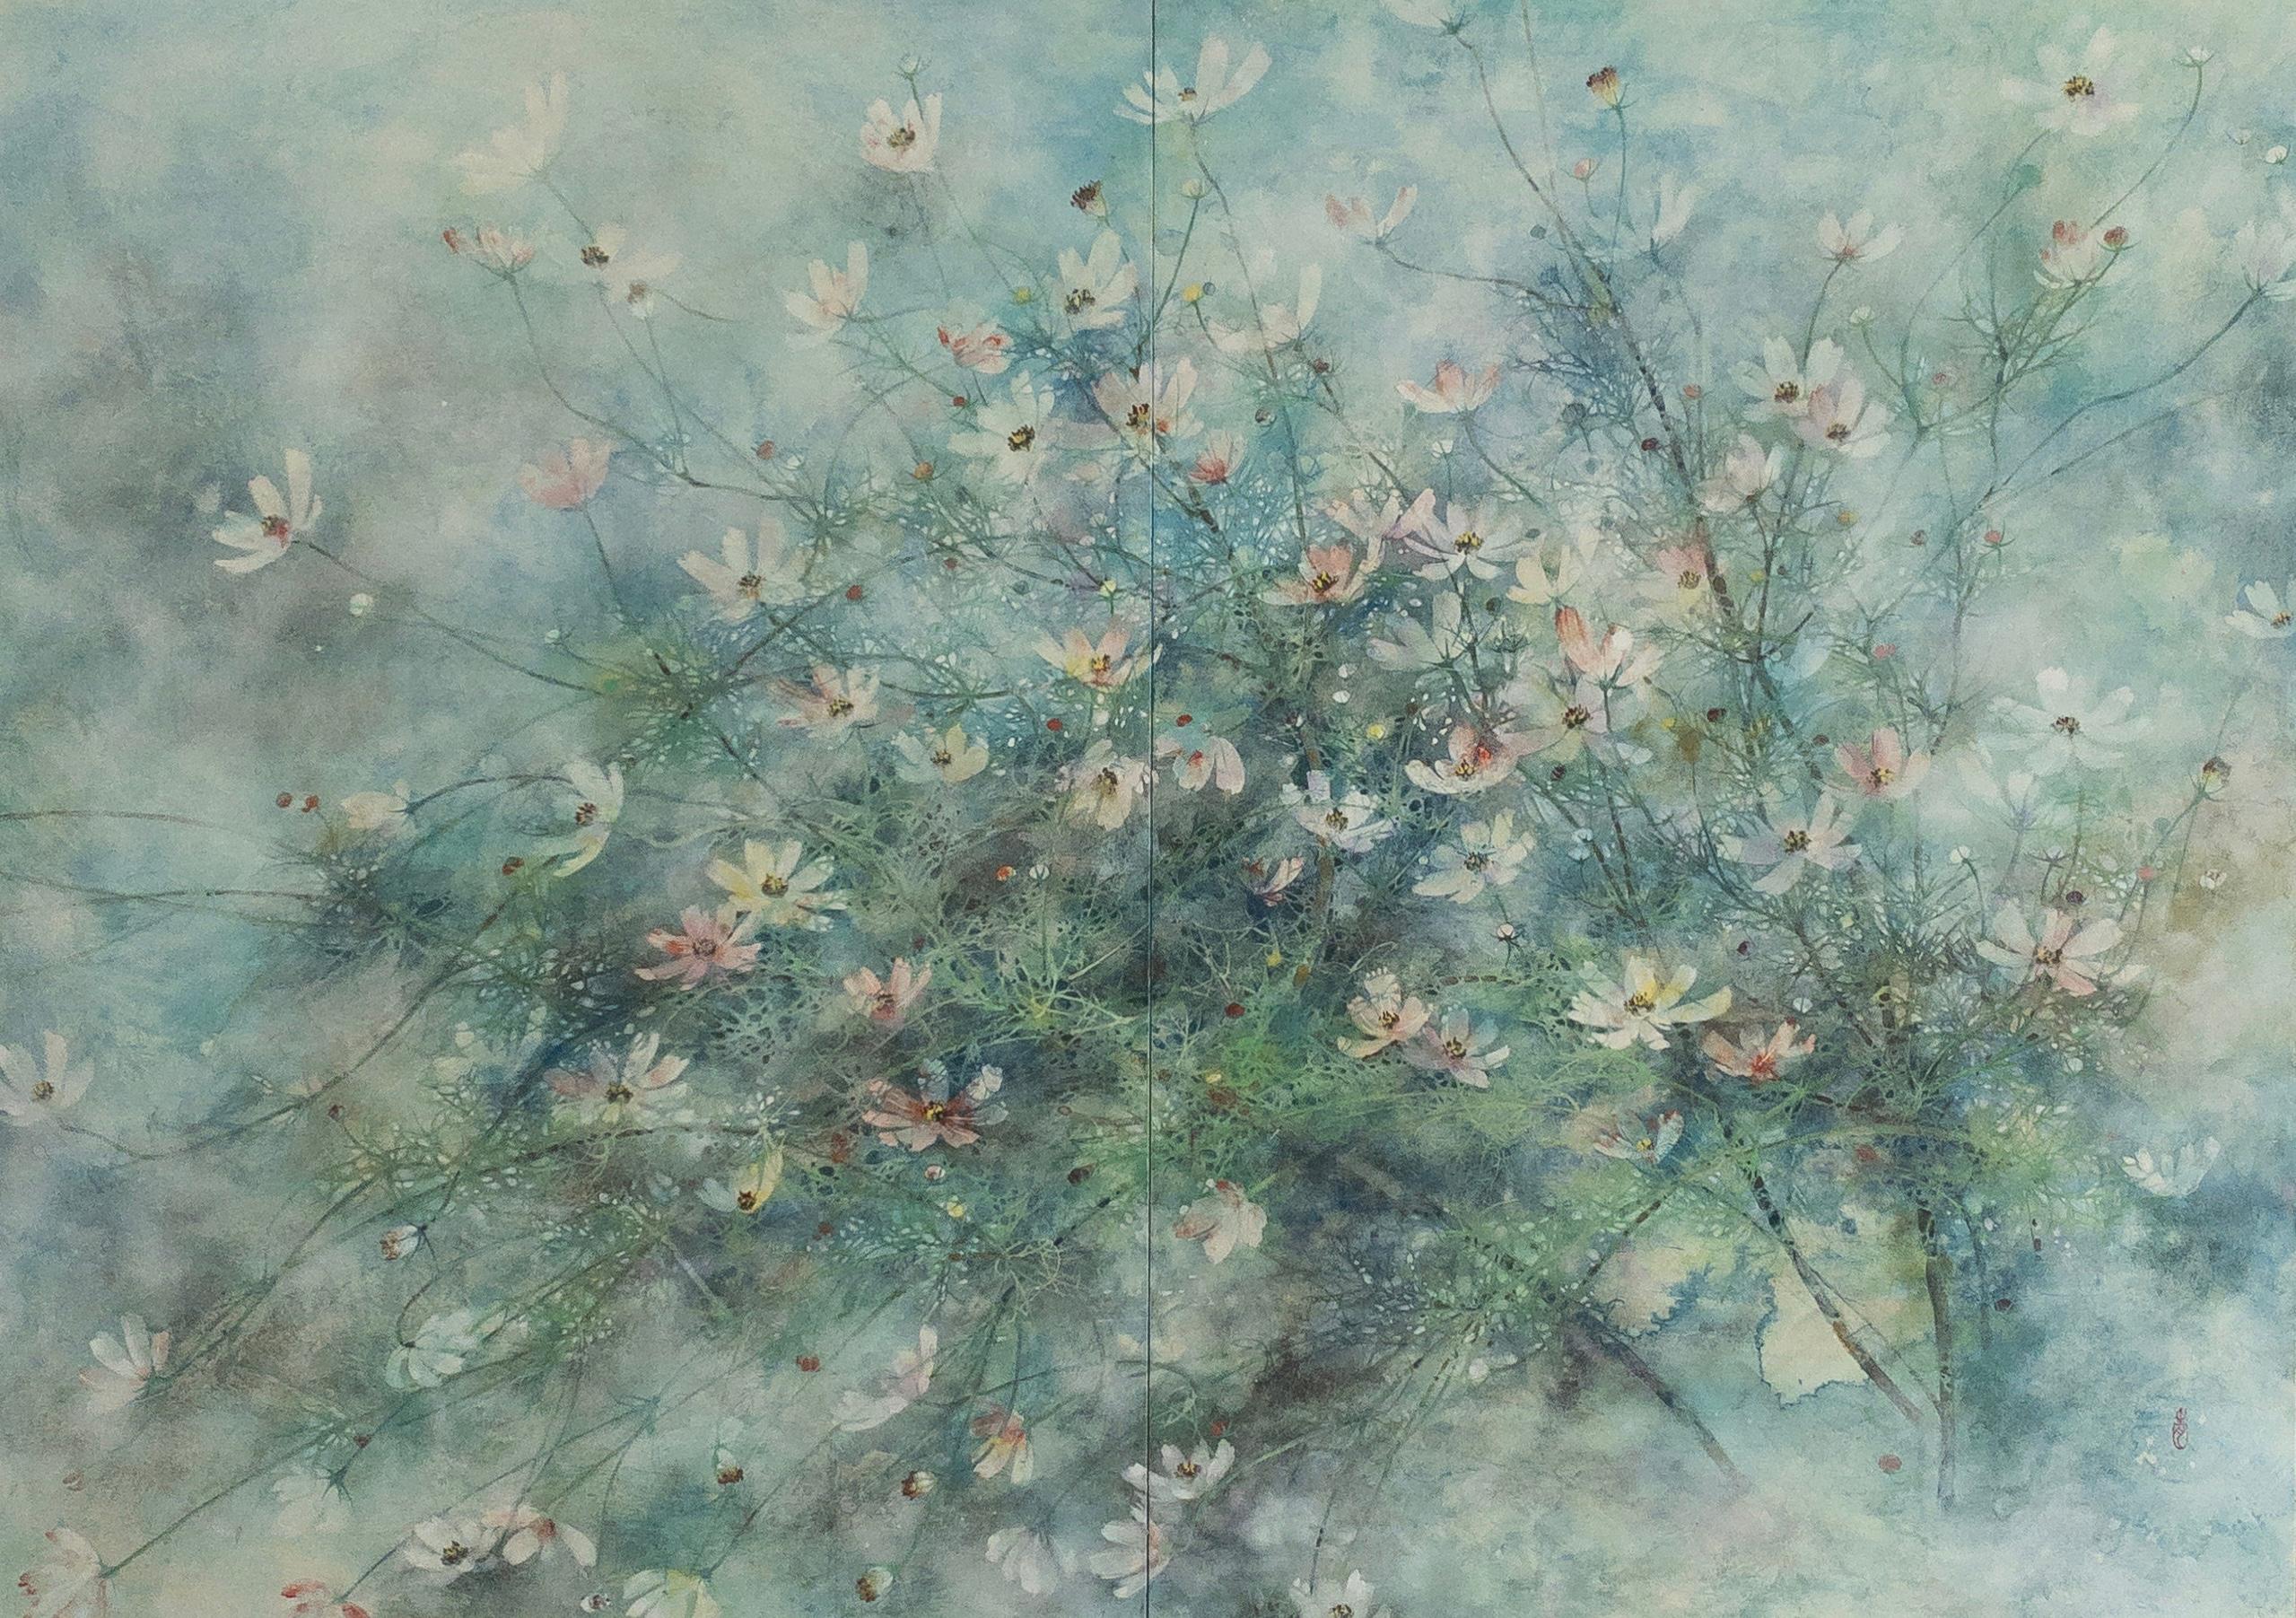 Hope by CHEN Yiching - Contemporary Nihonga painting, cosmos flowers, blue